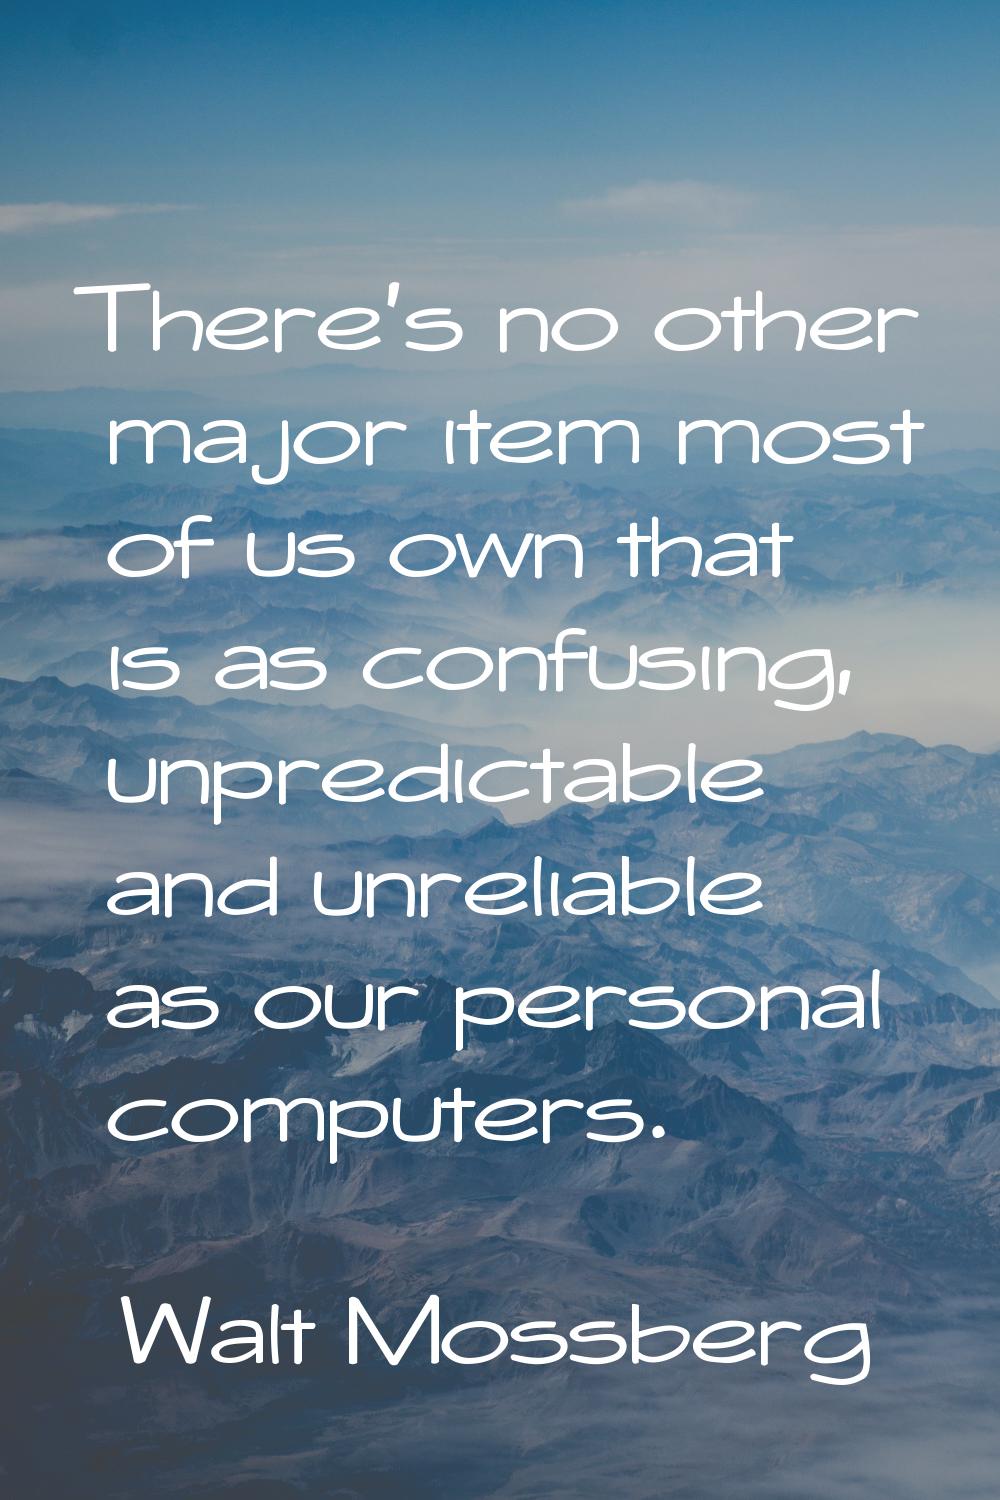 There's no other major item most of us own that is as confusing, unpredictable and unreliable as ou